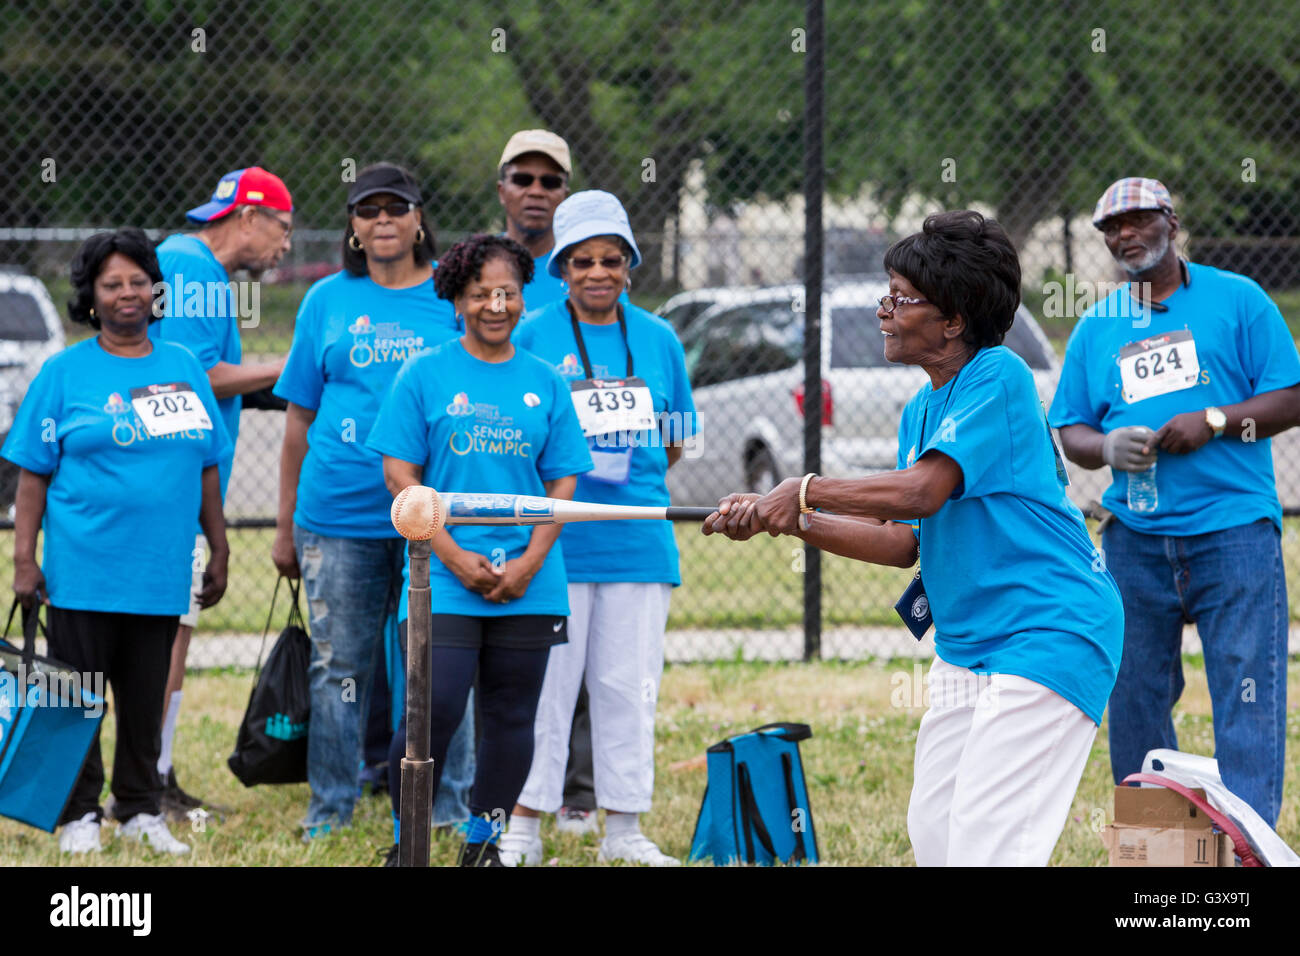 Detroit, Michigan - The 'softball hit' competition during the Detroit Recreation Department's Senior Olympics. Stock Photo